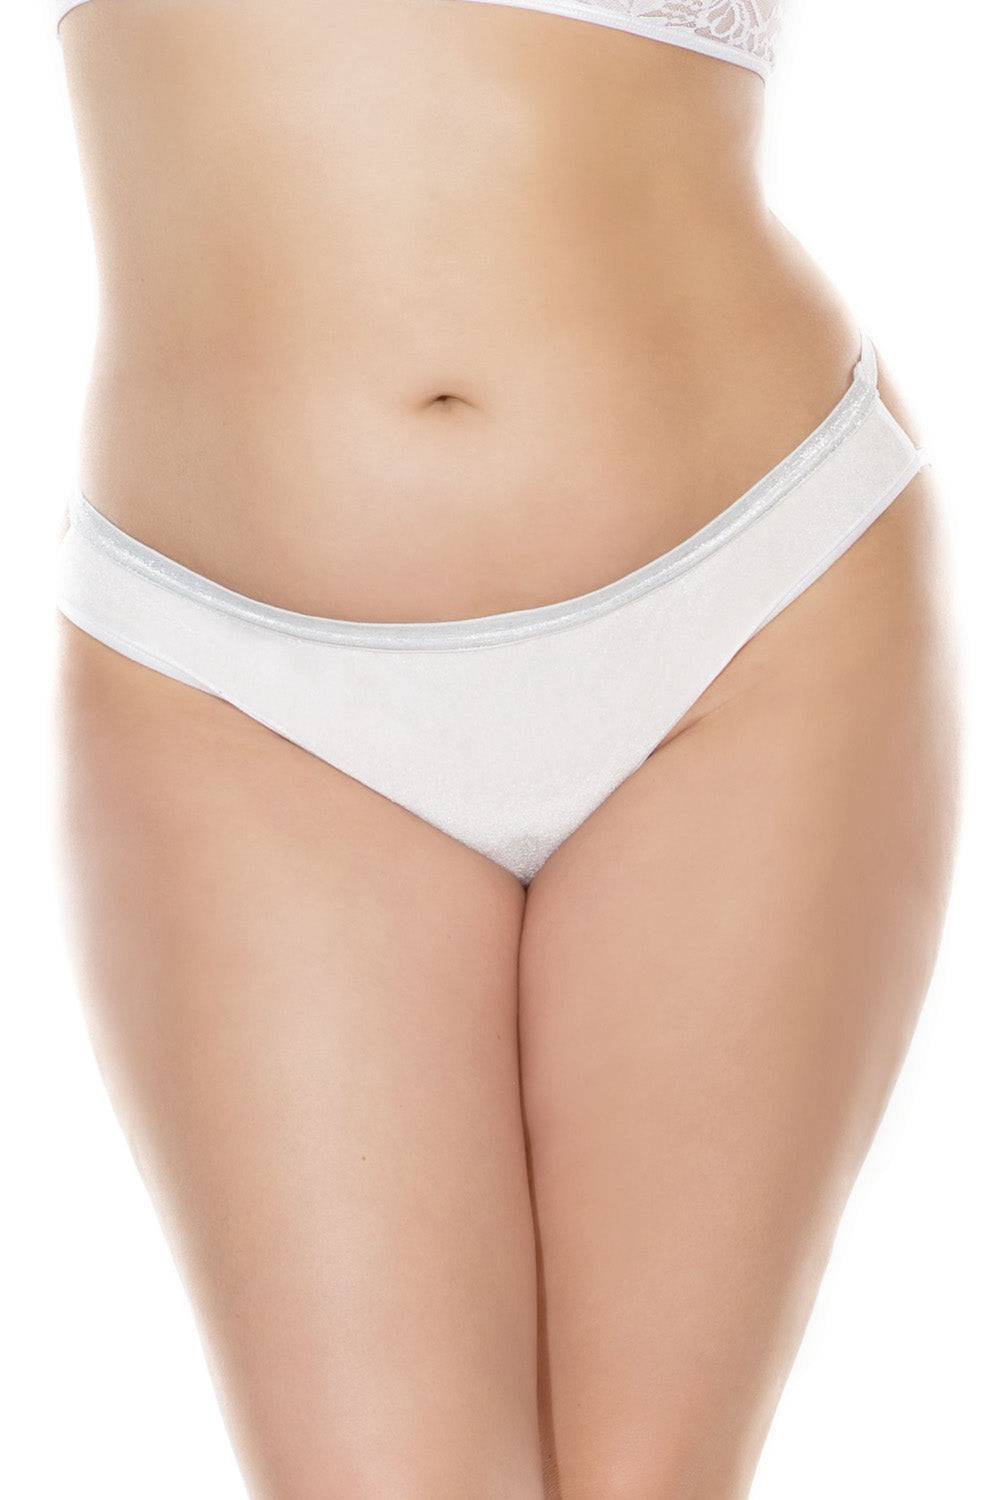 Coquette - 3892X - Caged Panty - White - OSXL - Stag Shop